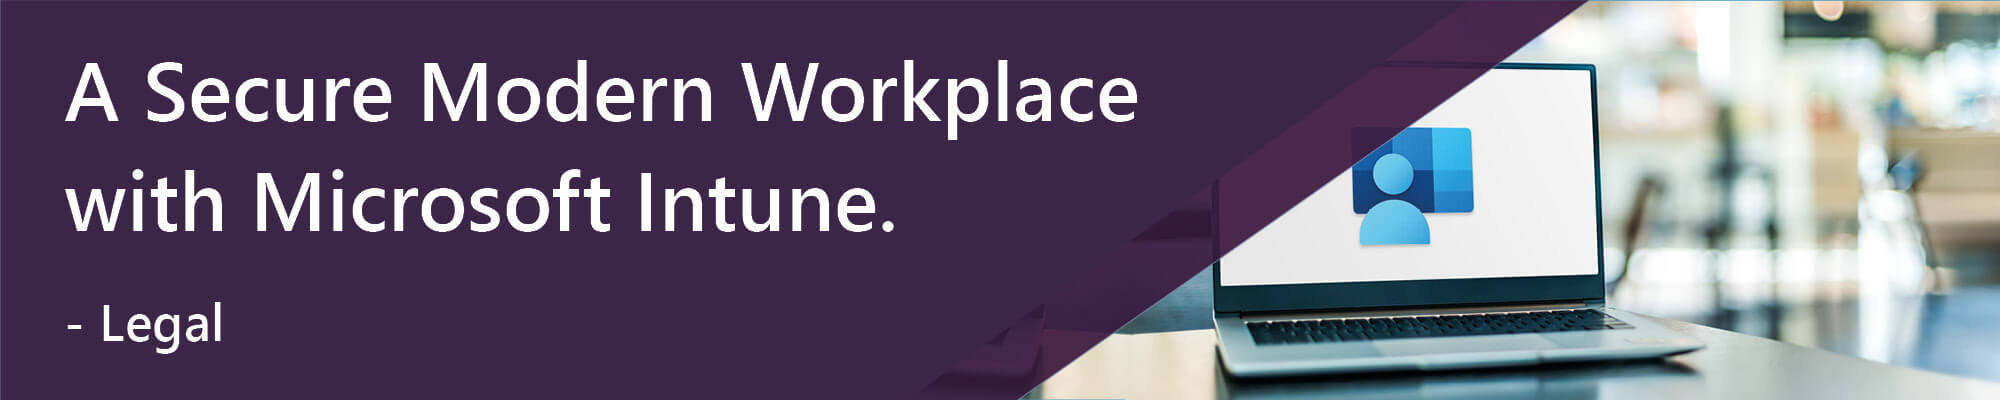 Secure Modern Workplace Microsoft Intune Web Page Banner